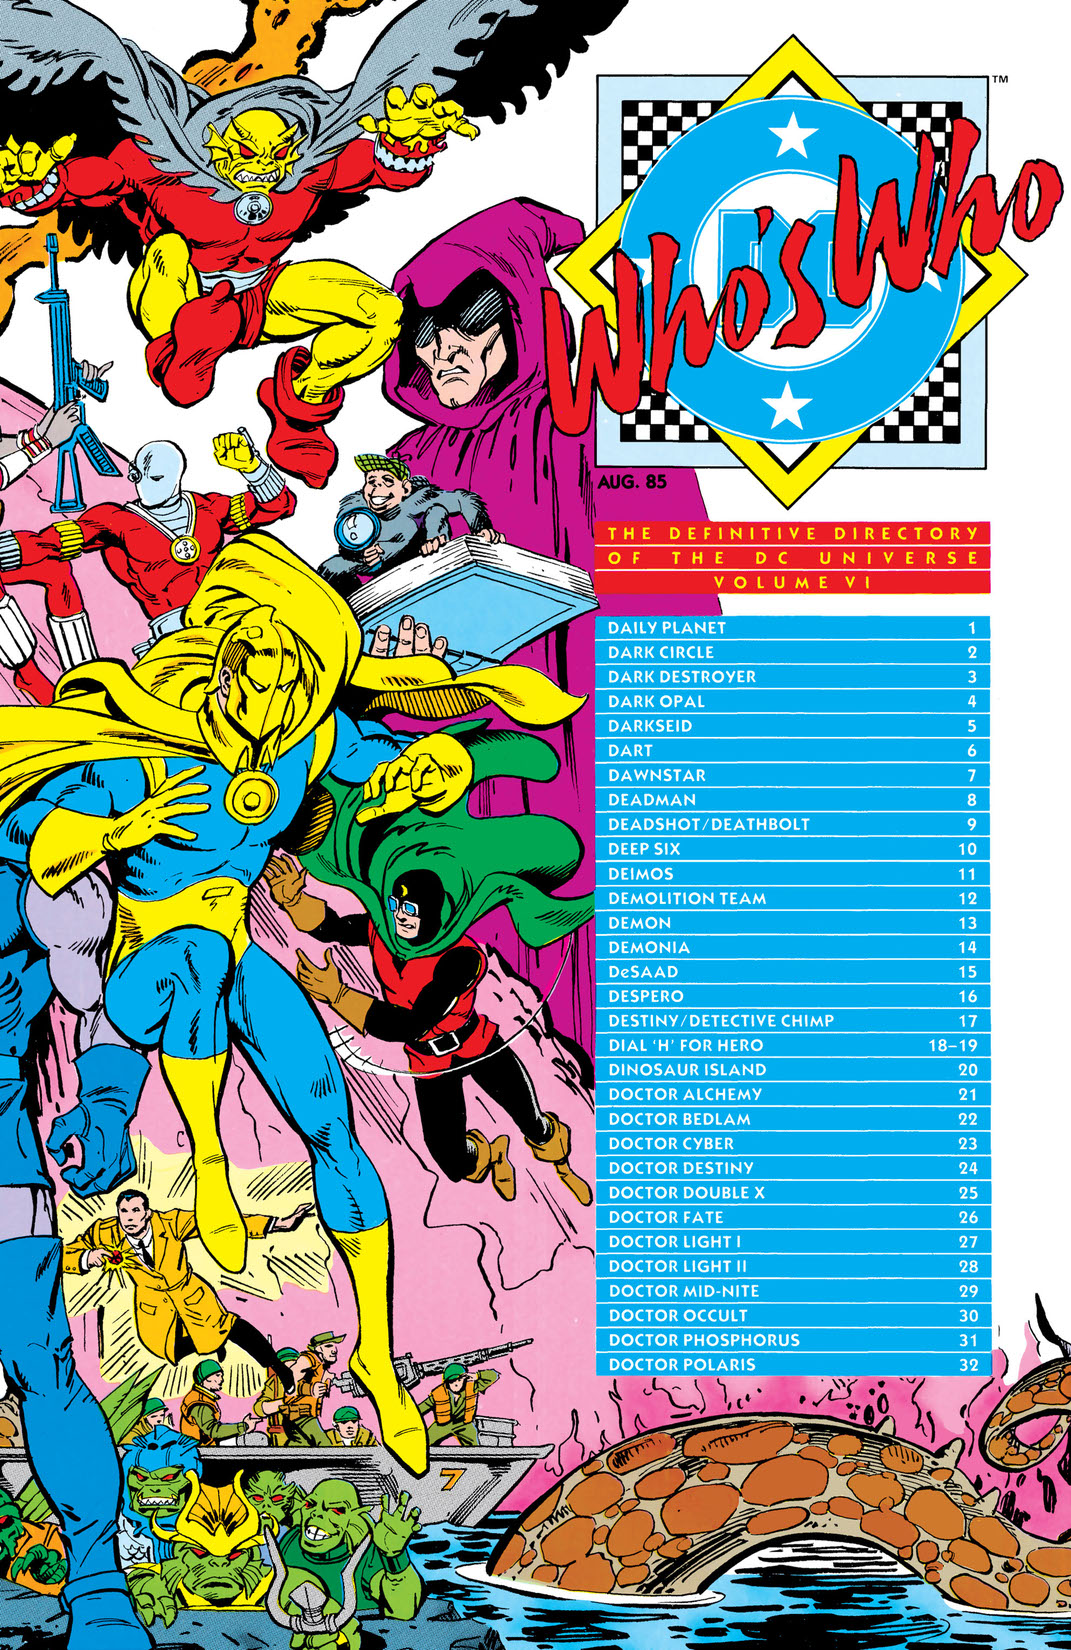 Who's Who: The Definitive Directory of the DC Universe #6 preview images